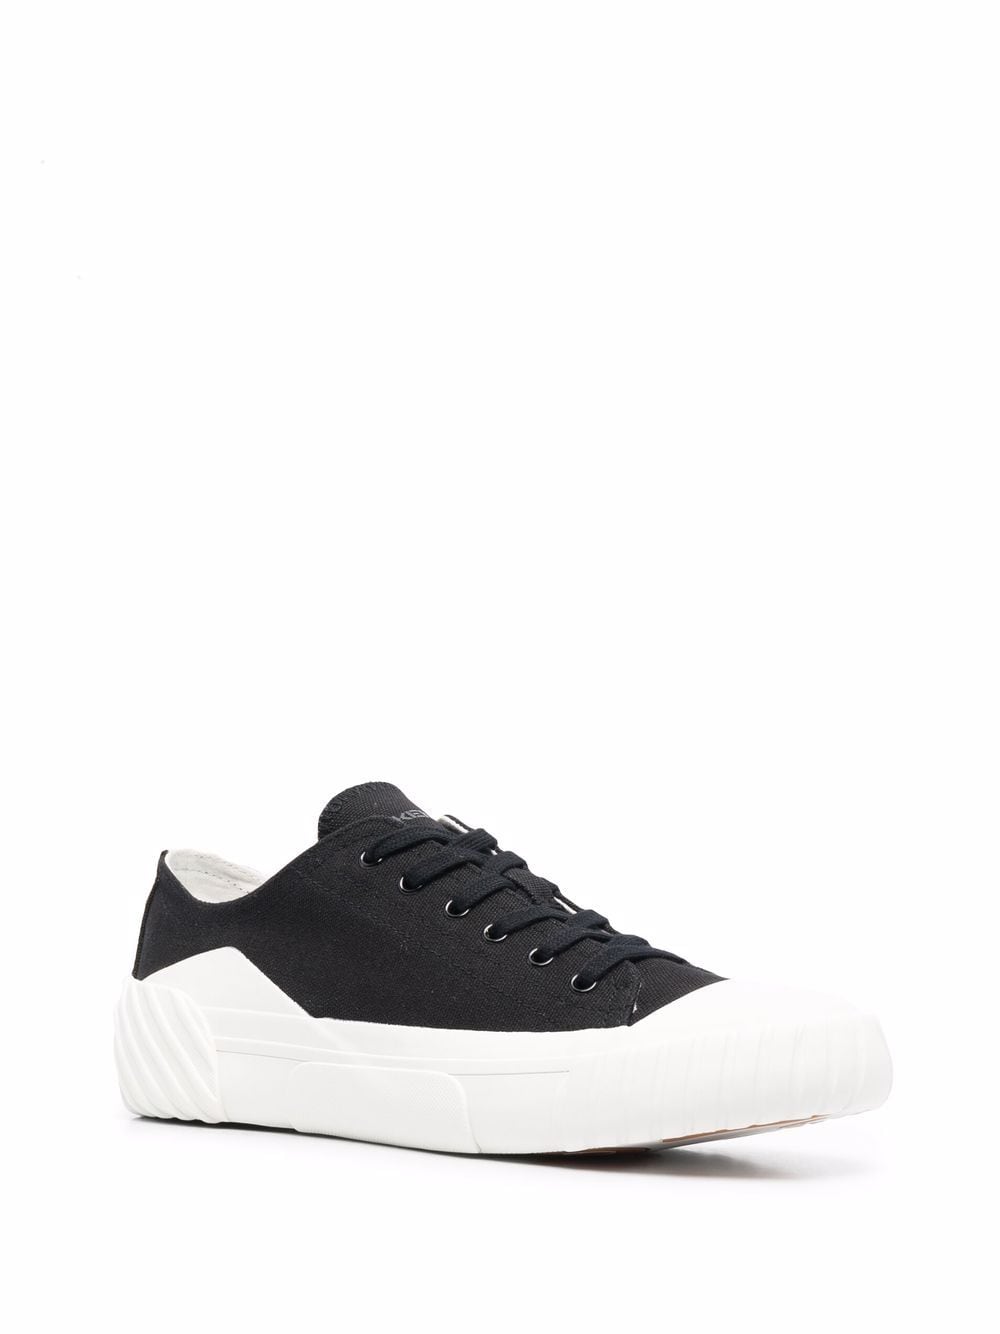 Kenzo Tiger Crest Low-top Trainers In Black | ModeSens